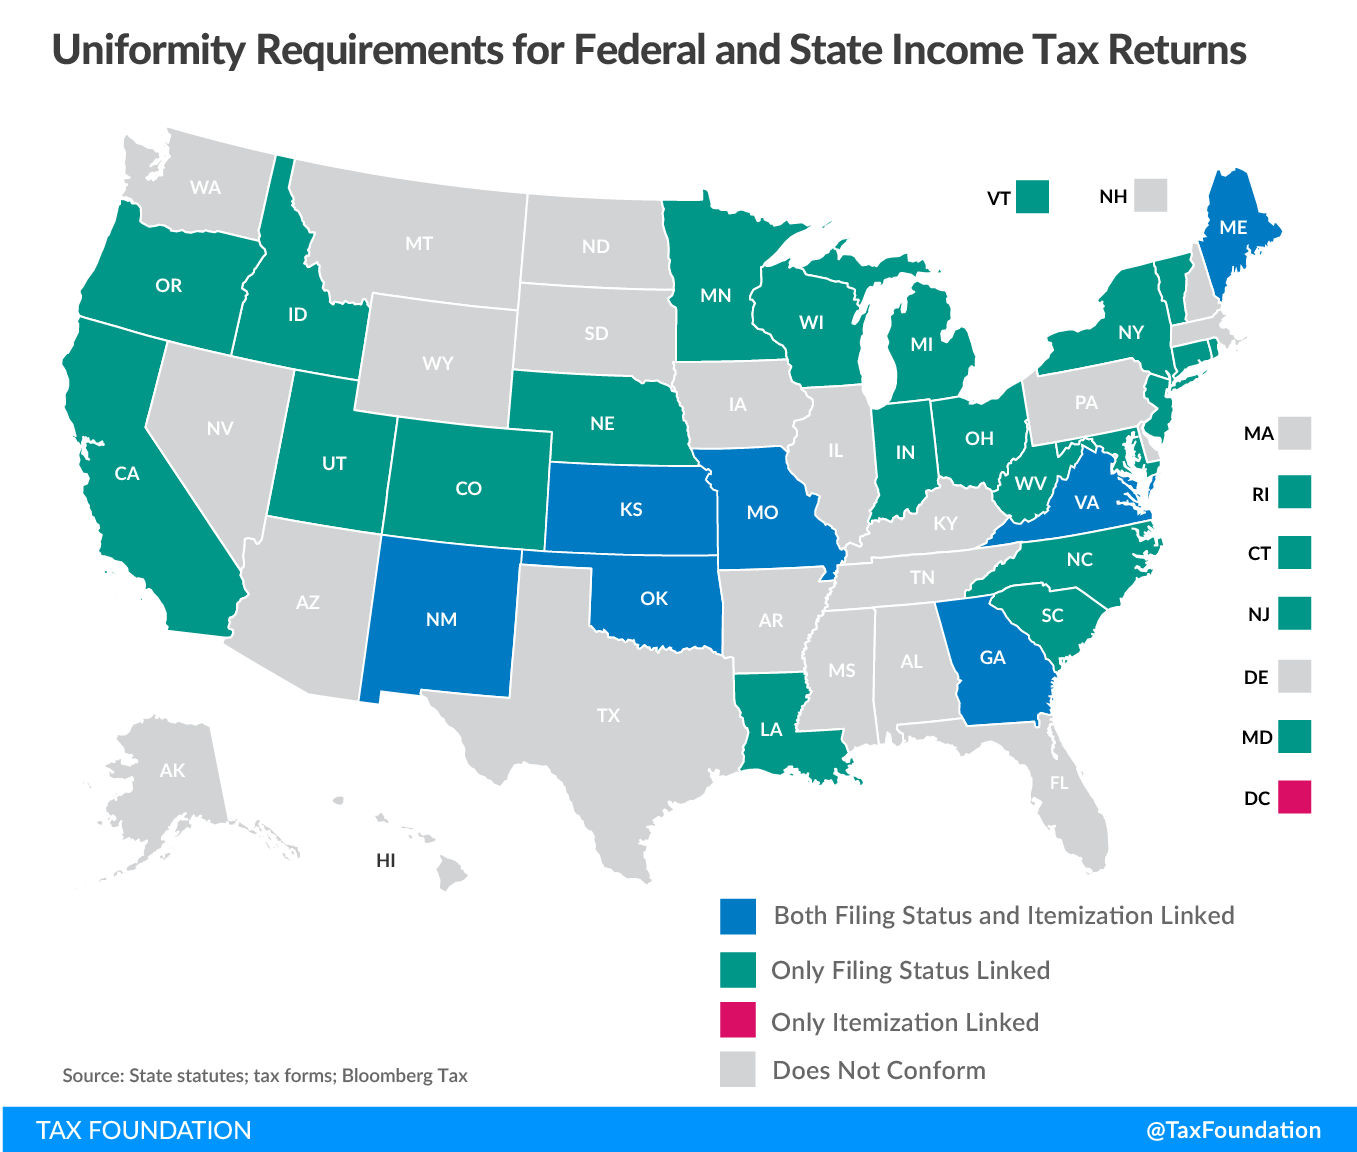 Uniformity Requirements for Federal and State Income Tax Returns, state tax conformity post-TCJA